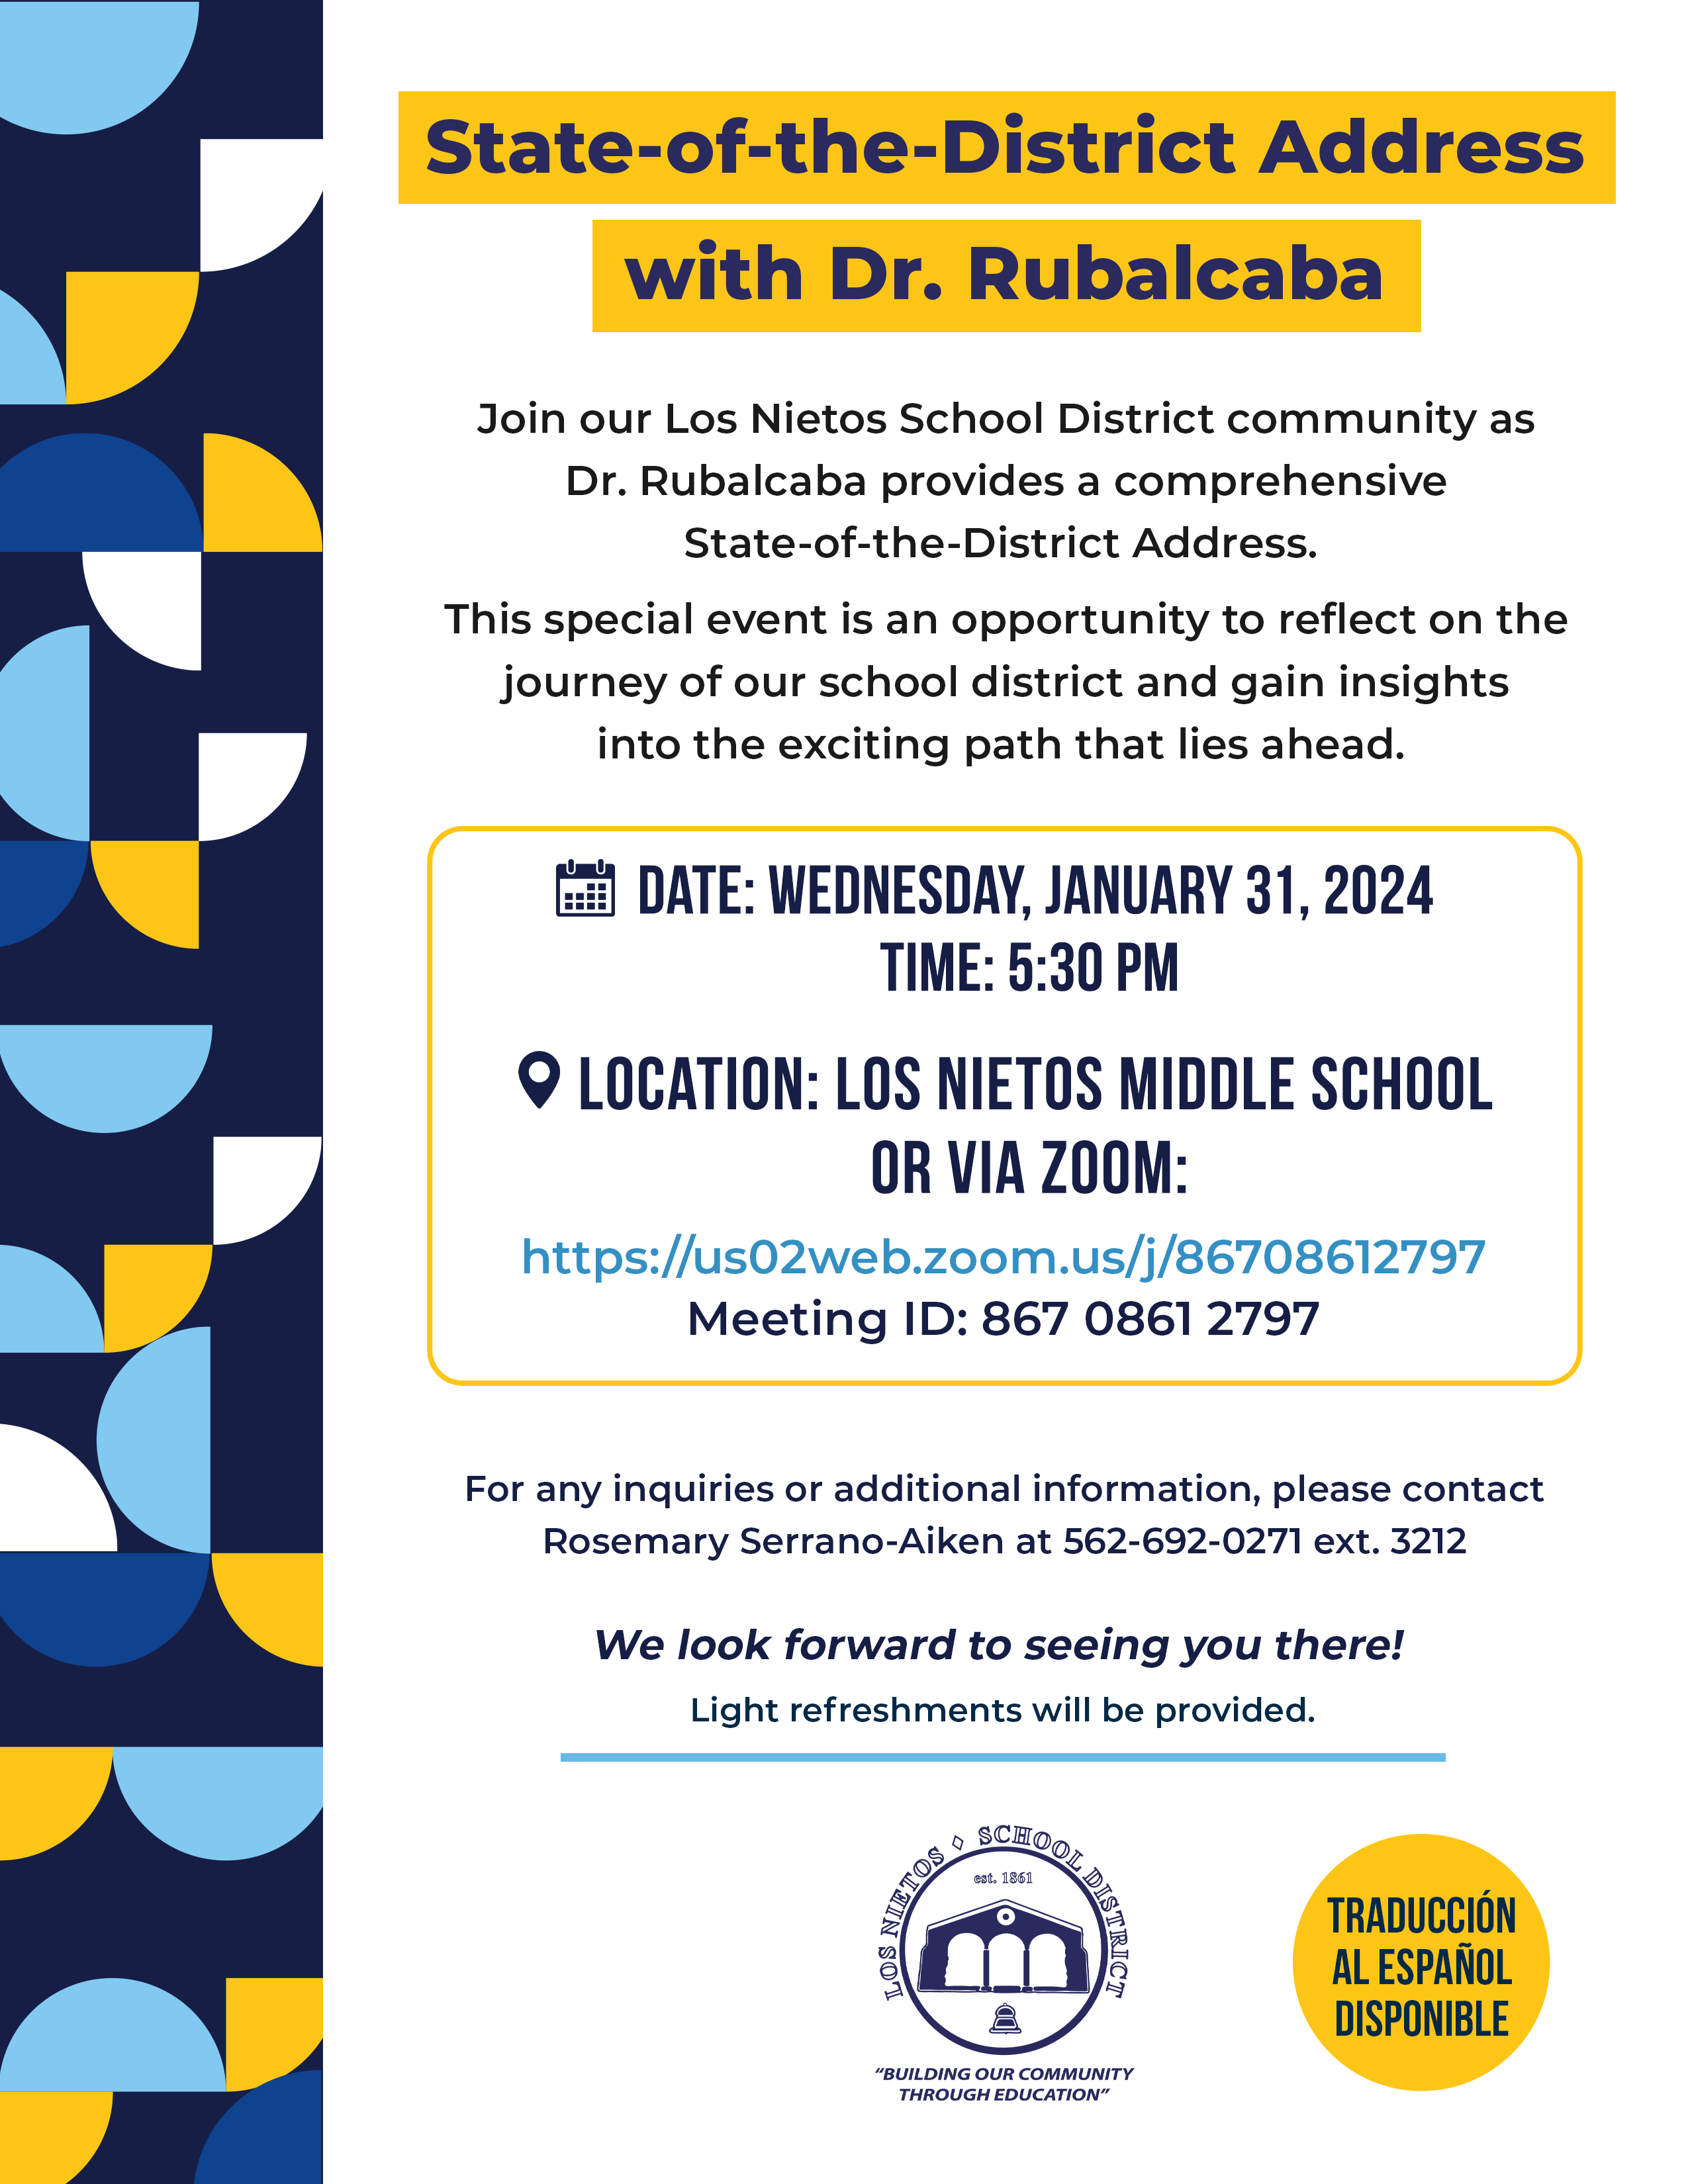 Flyer for the State-of-the-District Address with Dr. Rubalcaba. The flyer features a modern, geometric design with blue and yellow accents. It invites the community of Los Nietos School District to join a comprehensive State-of-the-District Address by Dr. Rubalcaba. The event is described as a reflection on the journey of the school district and an insight into the future. The details include the date, Wednesday, January 31, 2024, at 5:30 PM, at Los Nietos Middle School or via Zoom, with a provided meeting ID and link. There's a note for inquiries directing to contact Rosemary Serrano-Aiken with a phone number and an extension. The flyer states 'We look forward to seeing you there!' and mentions that light refreshments will be provided. At the bottom, there is an emblem of Los Nietos School District, and a note that translation to Spanish is available. The district's motto 'Building Our Community Through Education' is also included.